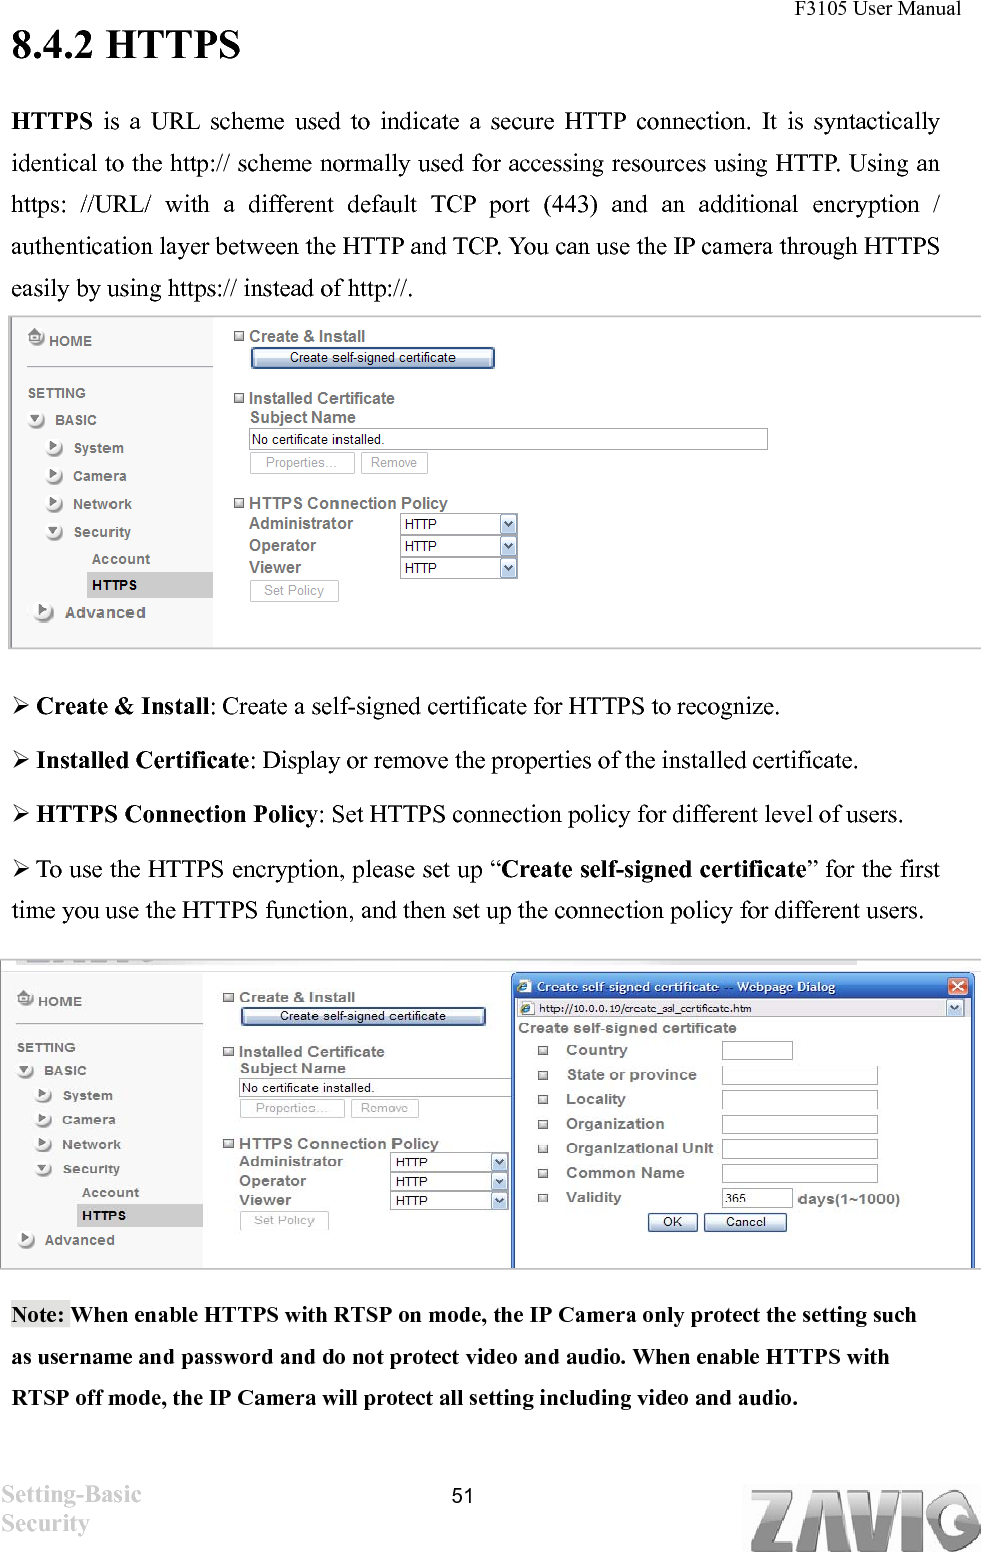 F3105 User Manual   8.4.2 HTTPS HTTPS is a URL scheme used to indicate a secure HTTP connection. It is syntactically identical to the http:// scheme normally used for accessing resources using HTTP. Using an https: //URL/ with a different default TCP port (443) and an additional encryption / authentication layer between the HTTP and TCP. You can use the IP camera through HTTPS easily by using https:// instead of http://.        Create &amp; Install: Create a self-signed certificate for HTTPS to recognize.  Installed Certificate: Display or remove the properties of the installed certificate.  HTTPS Connection Policy: Set HTTPS connection policy for different level of users.  To use the HTTPS encryption, please set up “Create self-signed certificate” for the first time you use the HTTPS function, and then set up the connection policy for different users.          Note: When enable HTTPS with RTSP on mode, the IP Camera only protect the setting such as username and password and do not protect video and audio. When enable HTTPS with RTSP off mode, the IP Camera will protect all setting including video and audio.    Setting-Basic Security  51